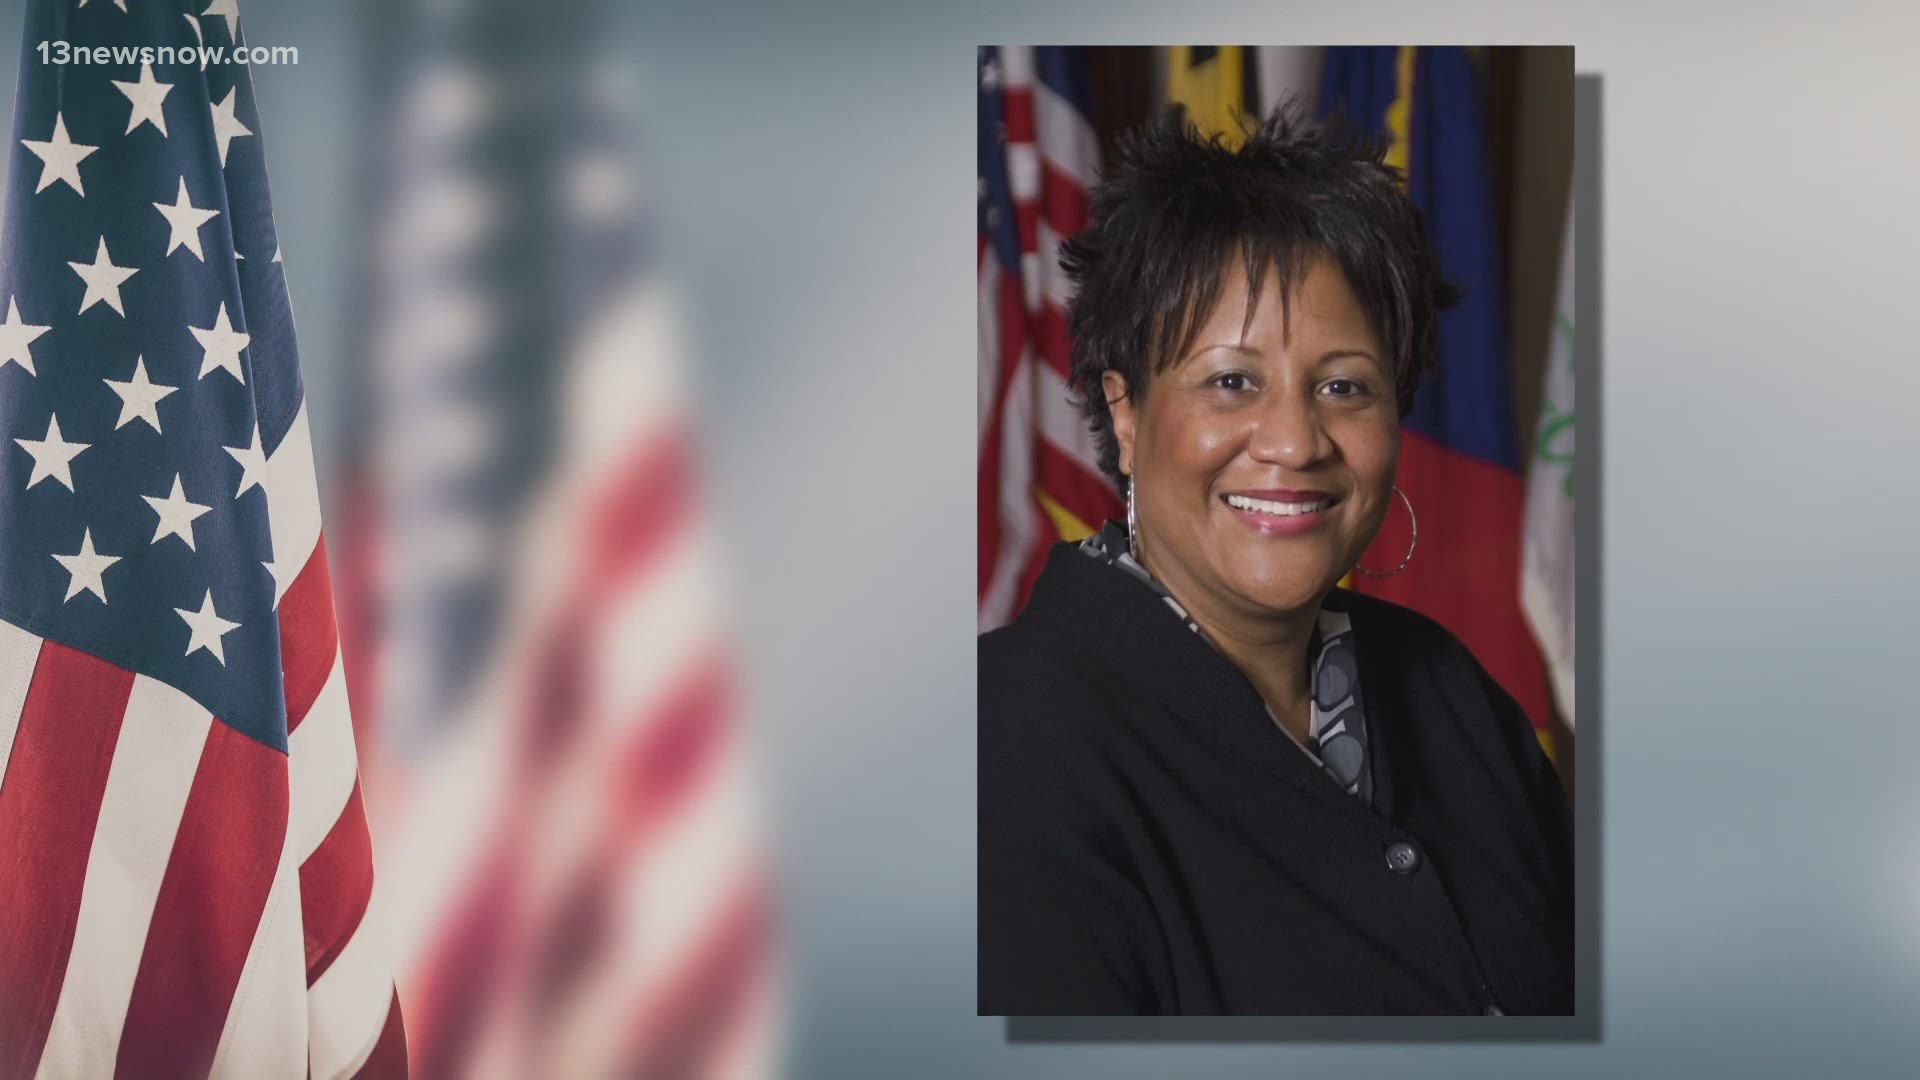 Portsmouth is one step closer to choosing its next city manager! A source confirms Angel Jones from Maryland is now the frontrunner for the position.